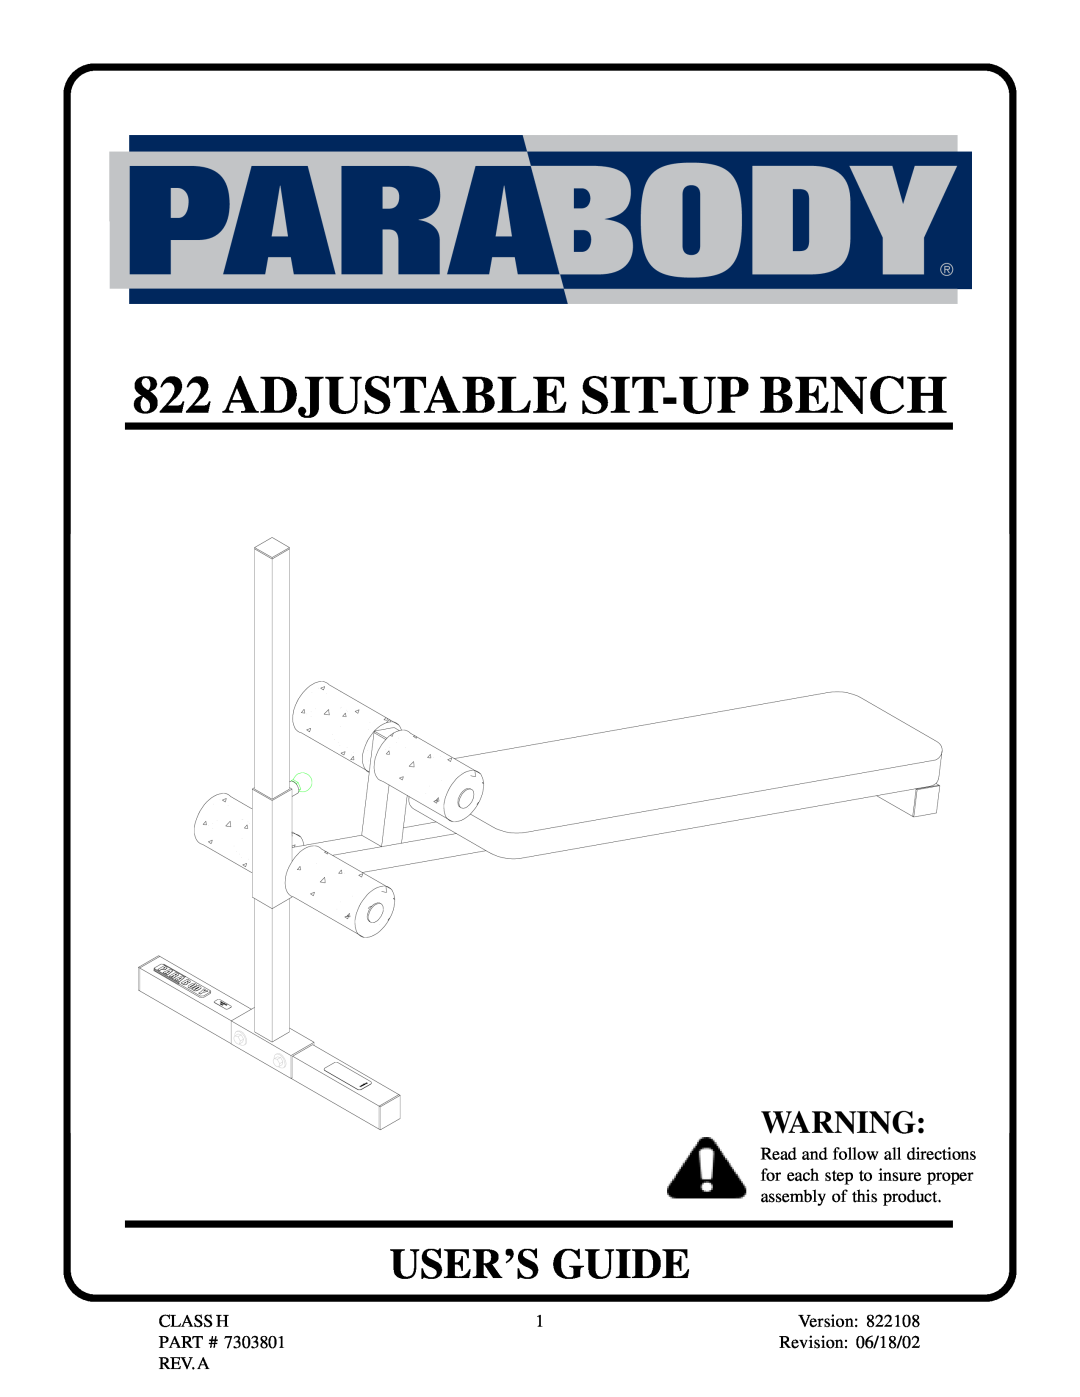 ParaBody 822 manual User’S Guide, Adjustable Sit-Up Bench 